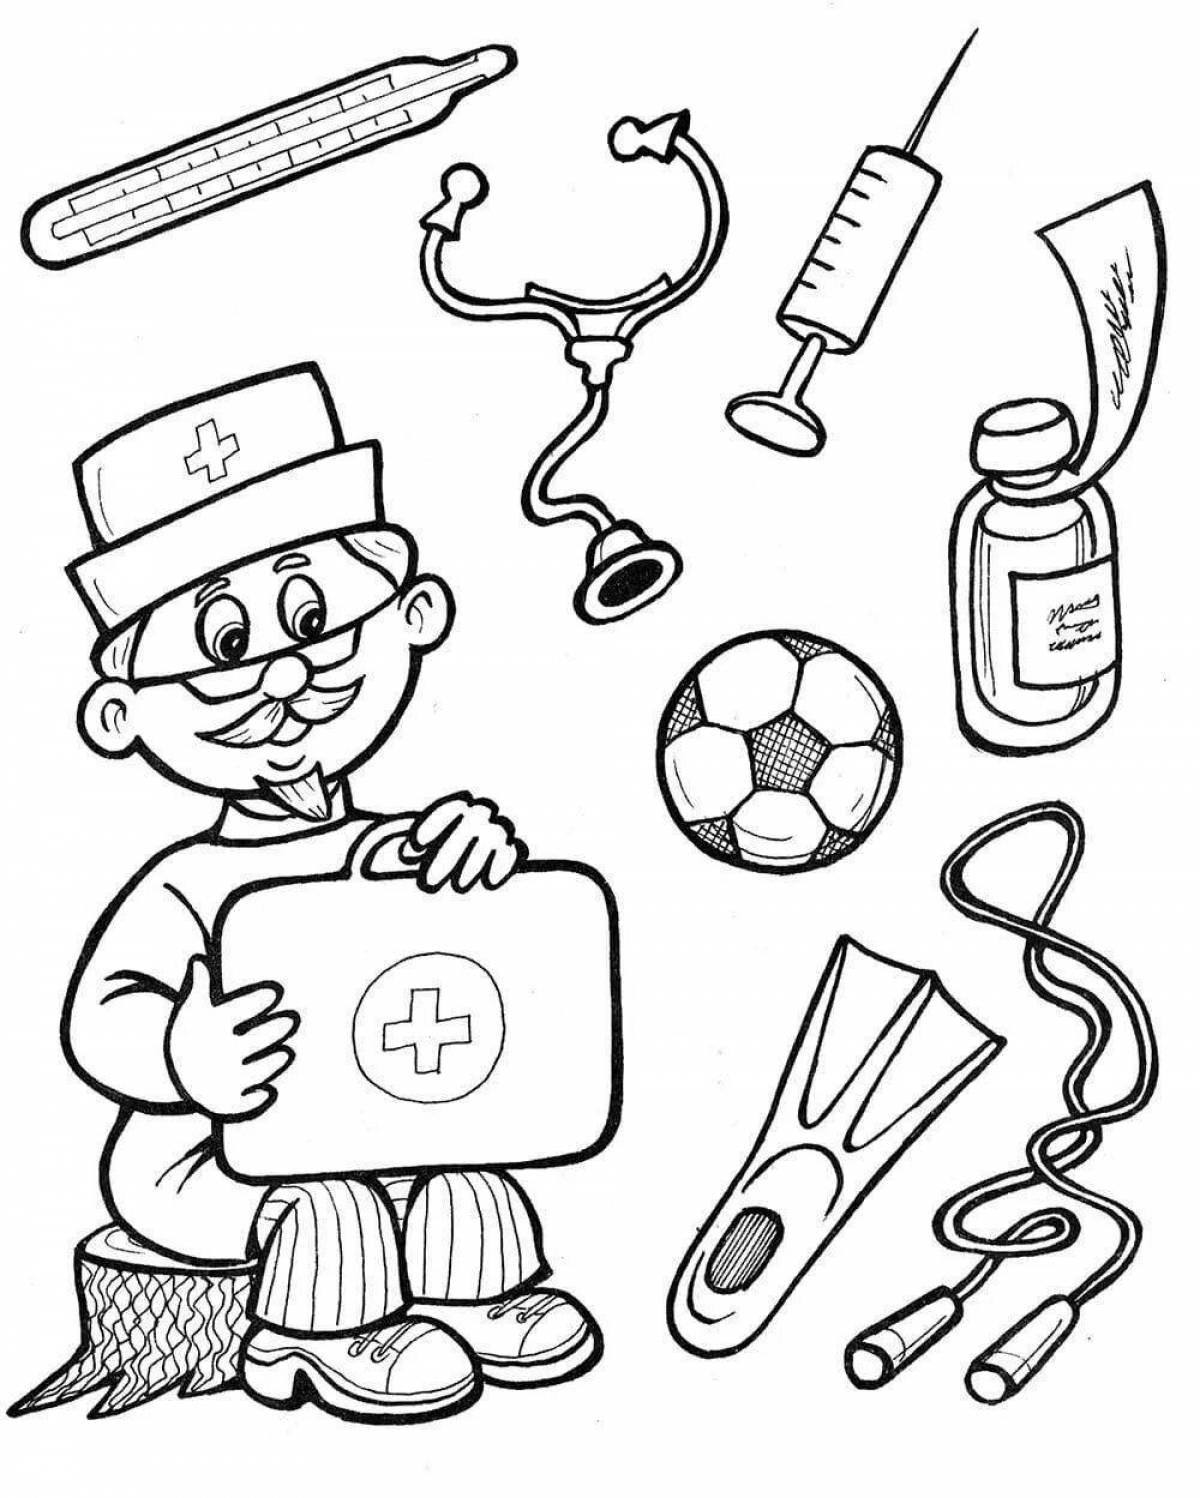 Exciting color doctor doctor coloring book